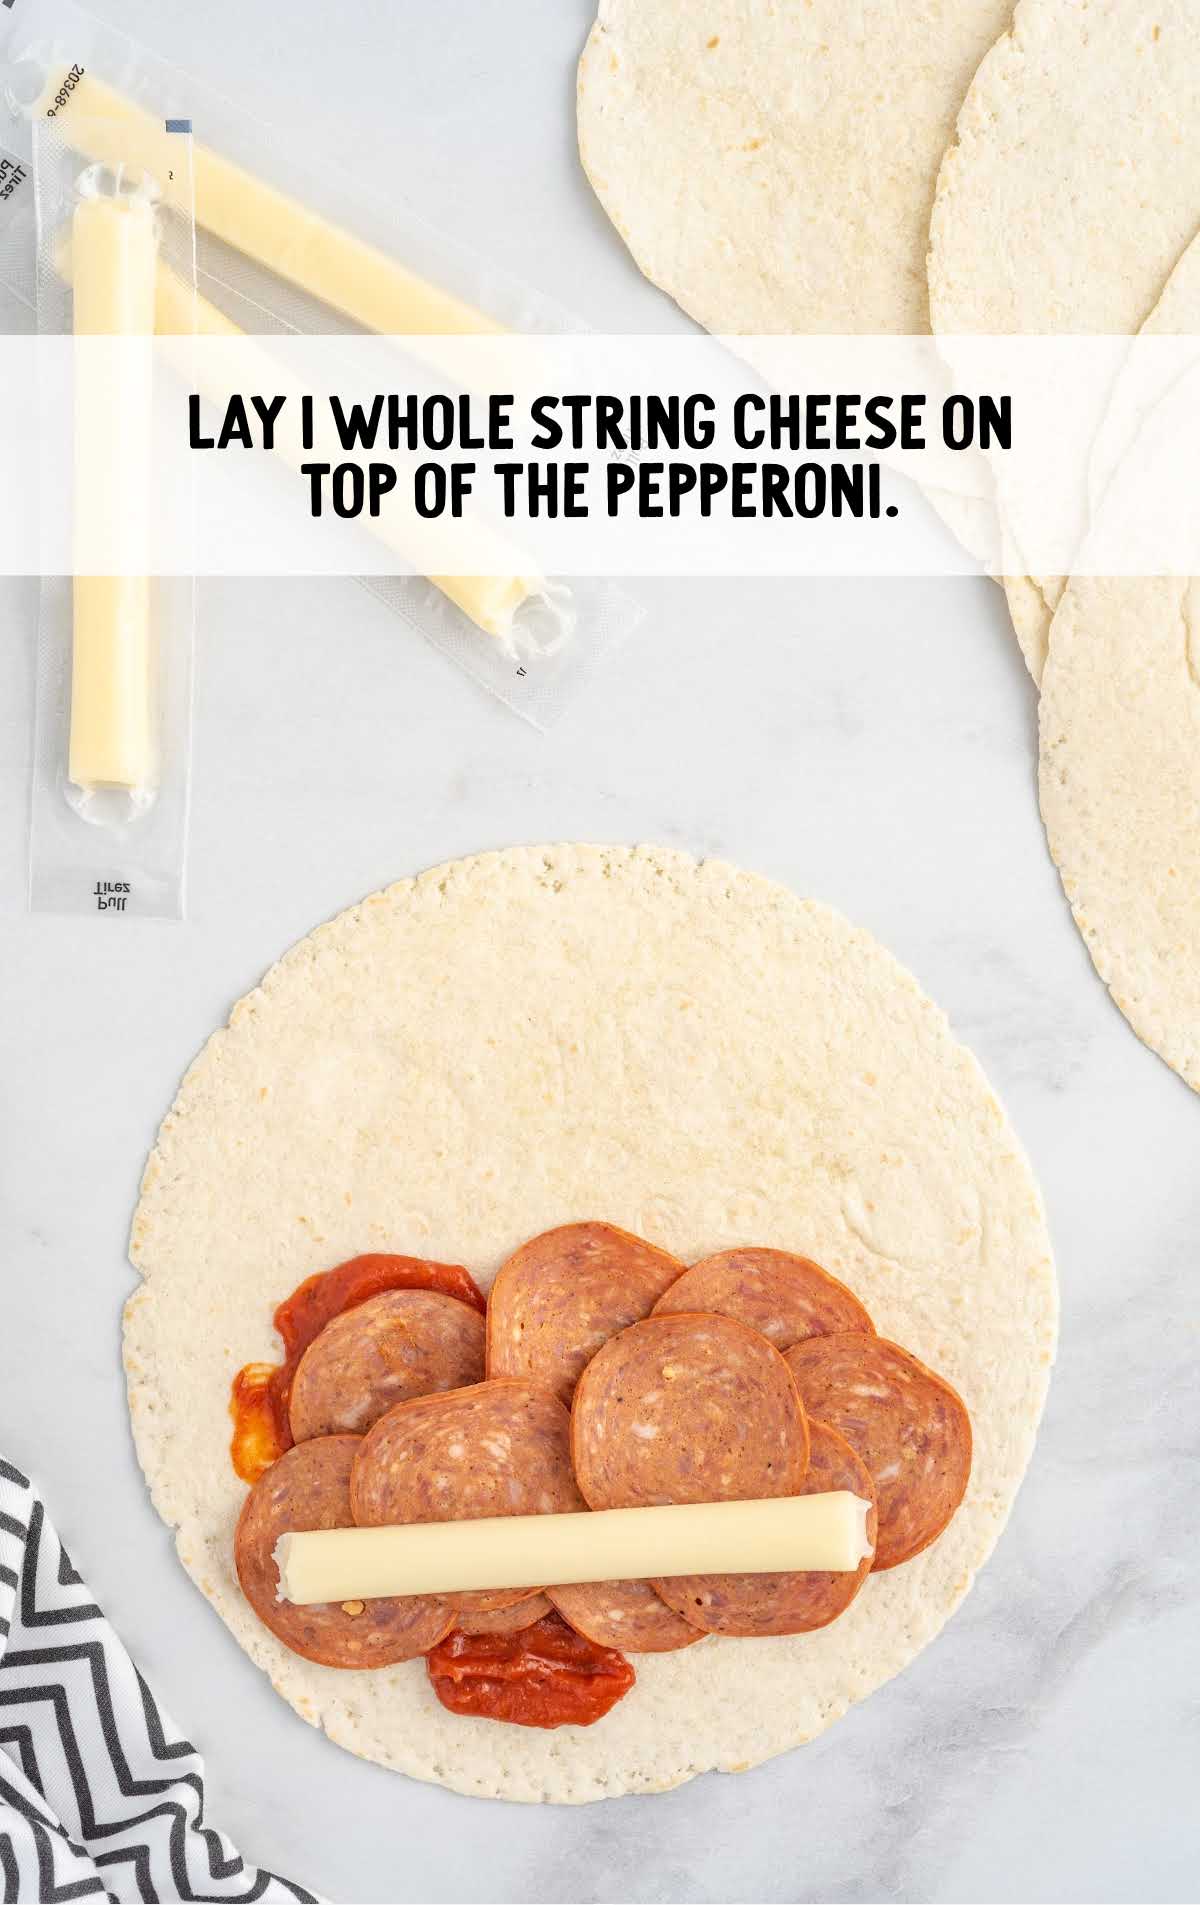 string cheese laid on top of the pepperoni